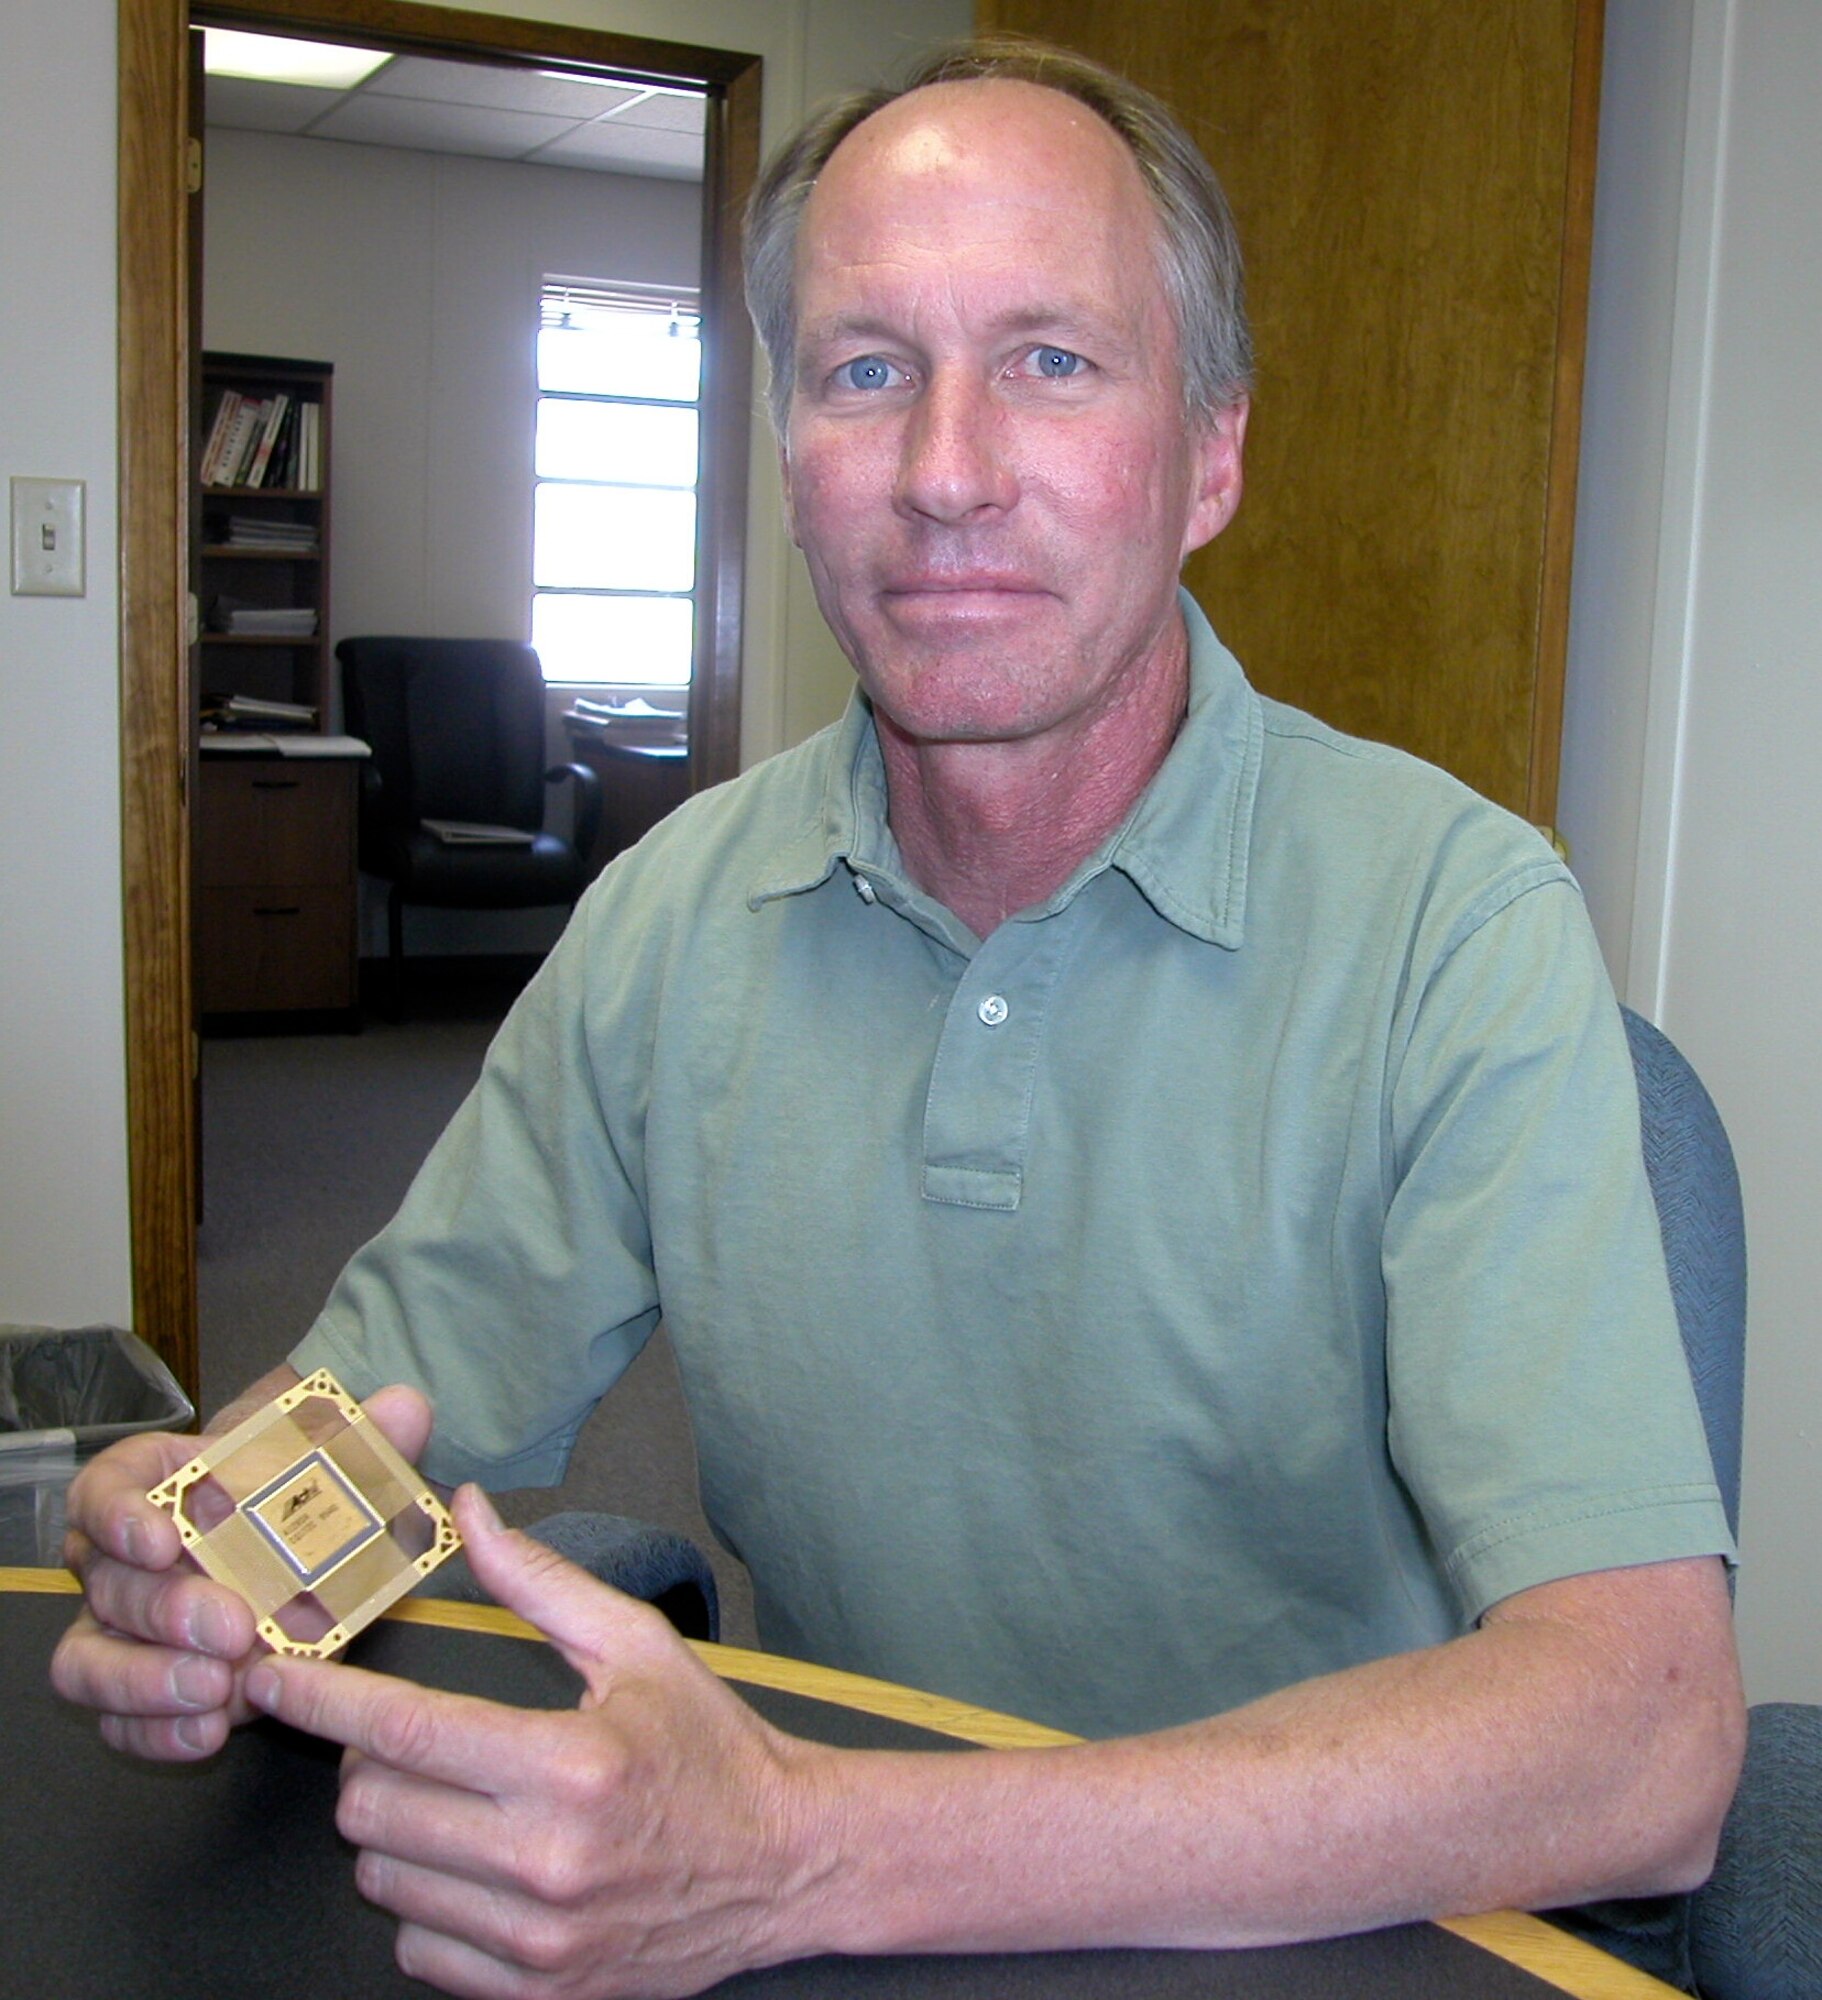 KIRTLAND AIR FORCE BASE,  N.M. — Creigh Gordon, Field Programmable Gate Array program manager, Air Force Research Laboratory's Space Vehicles Directorate, holds a copy of the small, radiation-hardened computer chip used in the Mars Pathfinder mission in 1997.  The FPGA Program is currently working with two contract companies to provide an updated version of the semiconductor device to employ in the next generation of Air Force spacecraft.  (Air Force photo by Michael P. Kleiman) 

